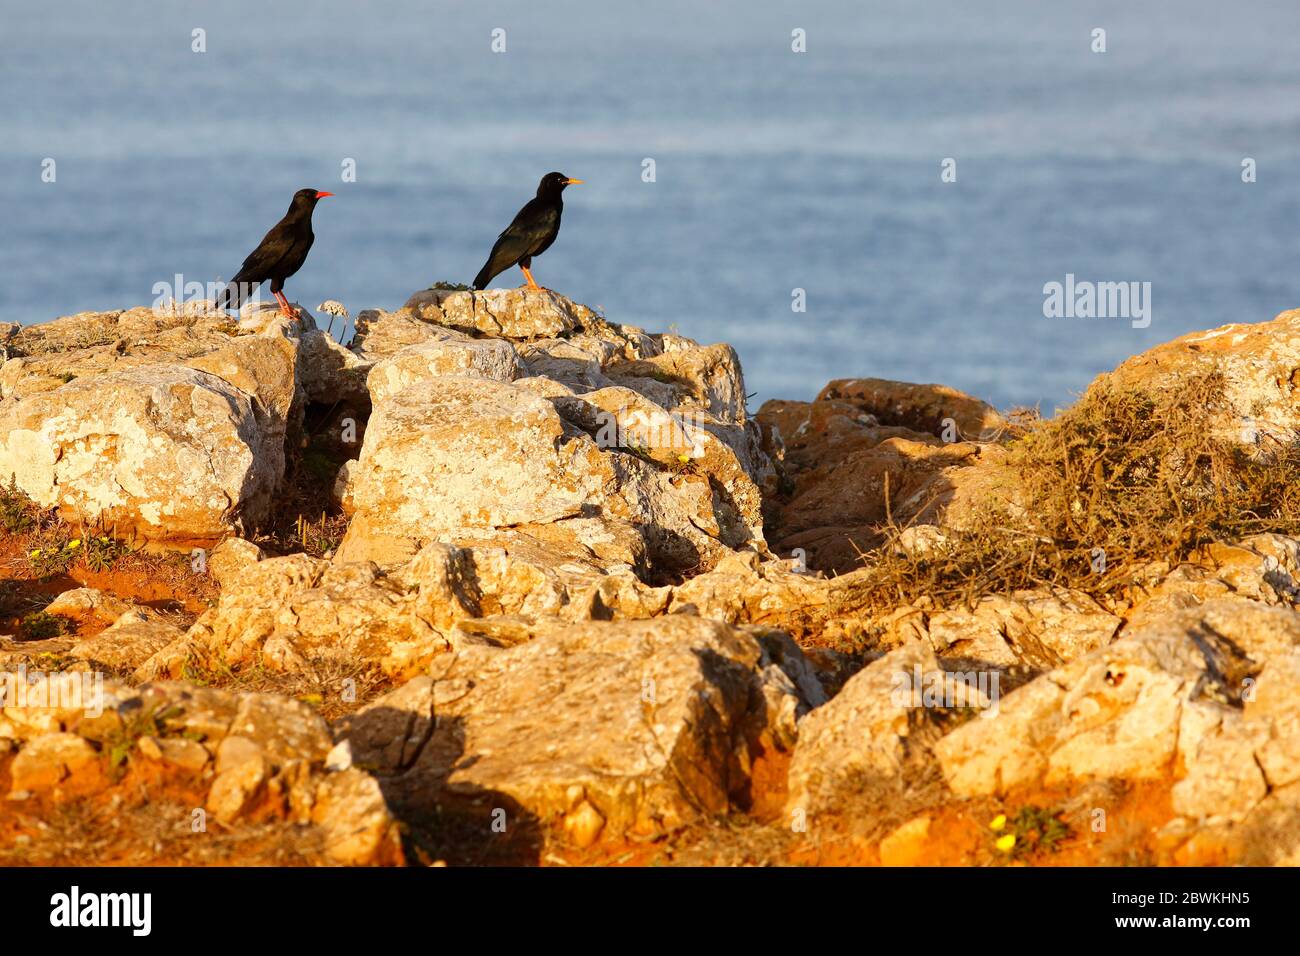 red-billed chough (Pyrrhocorax pyrrhocorax erythroramphos), adult and juvenile (right) perching on the edge of a cliff along the Atlantic coast, Portugal Stock Photo